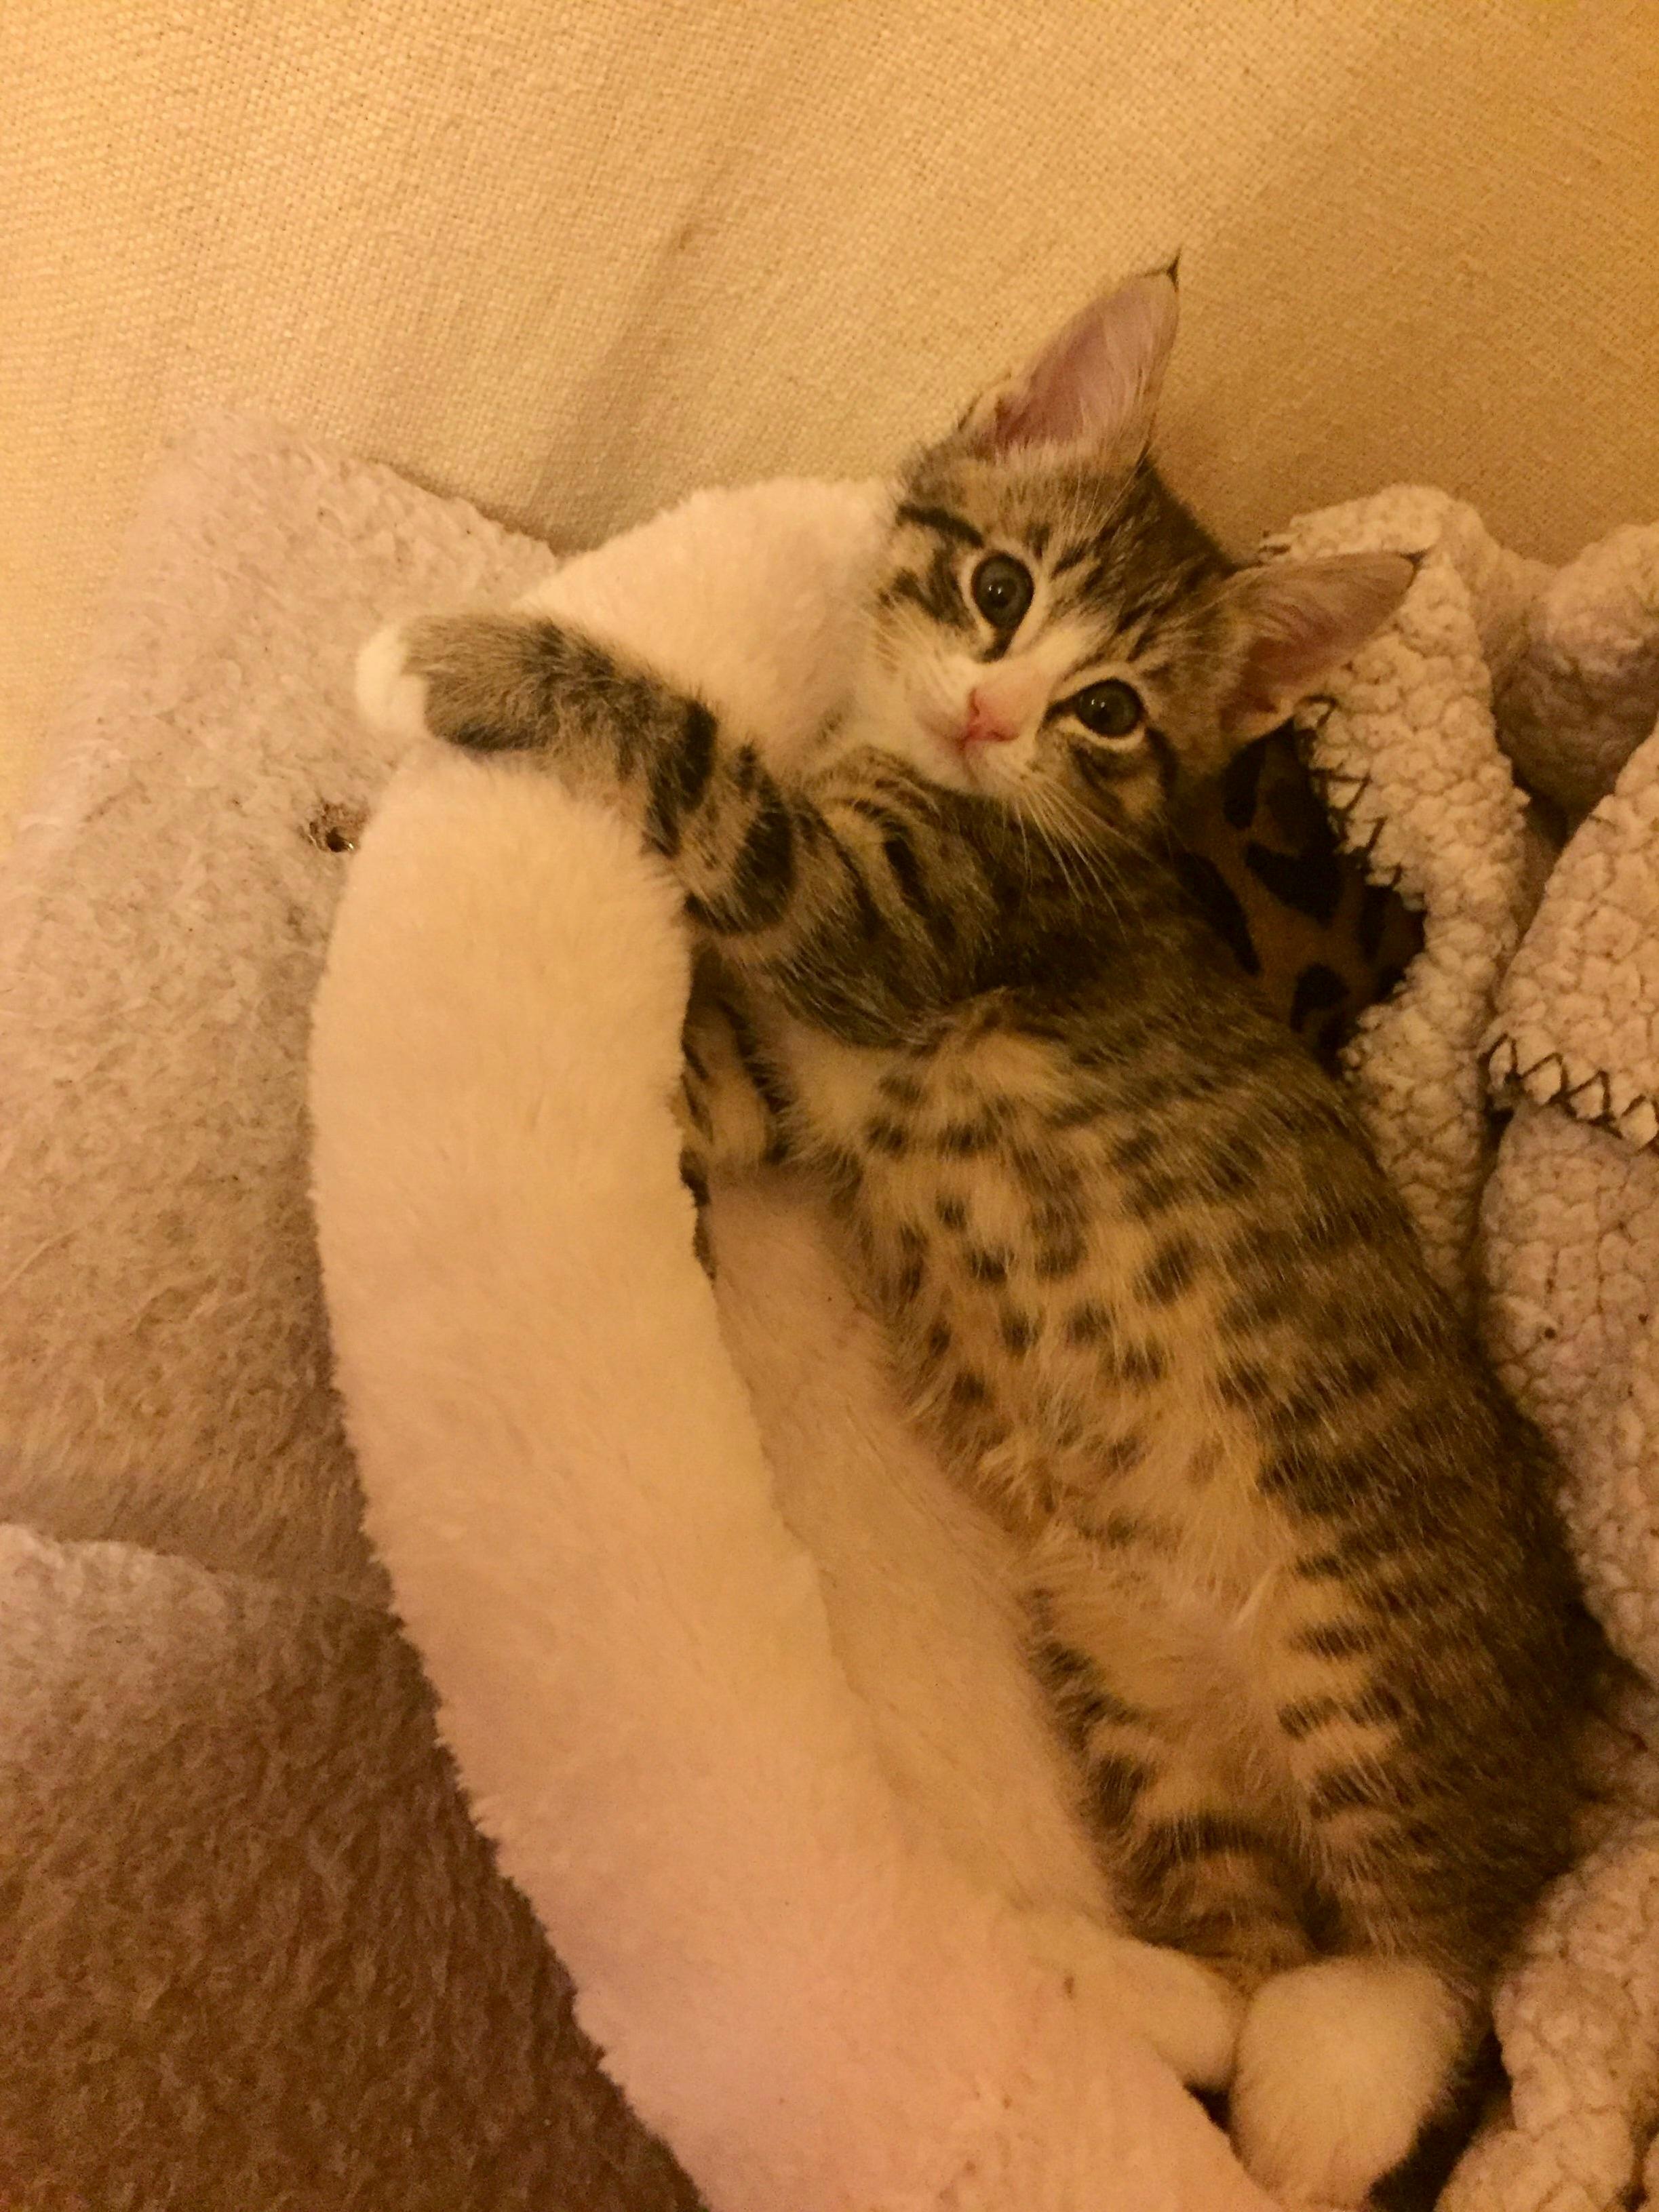 One of my favorite things about my kitten is his polka dot belly.